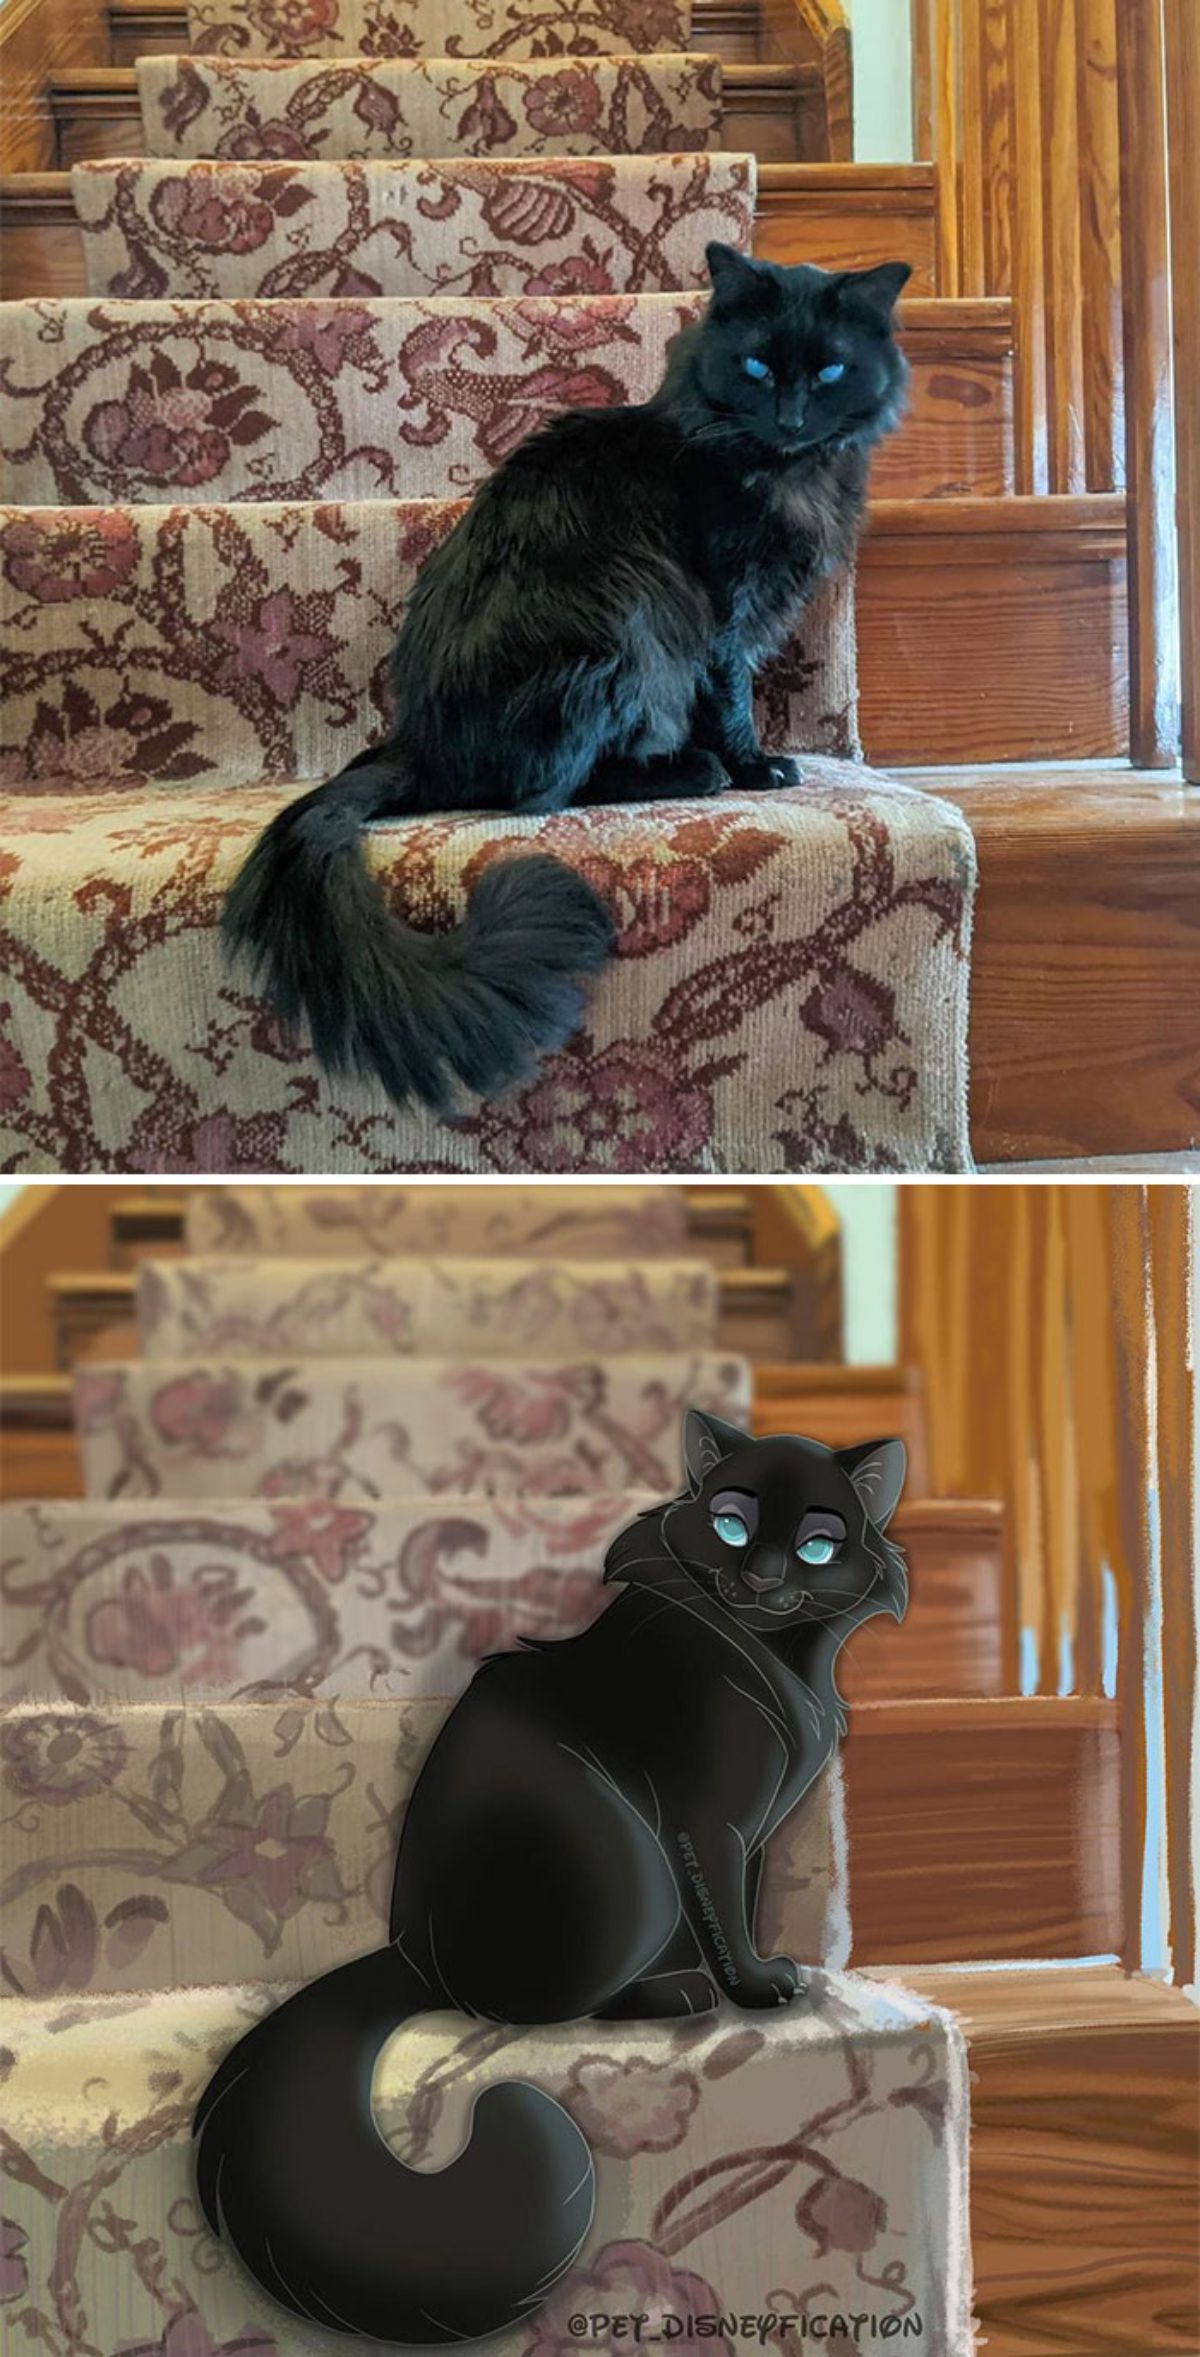 real photo and cartoon image of a black cat sitting on stairs